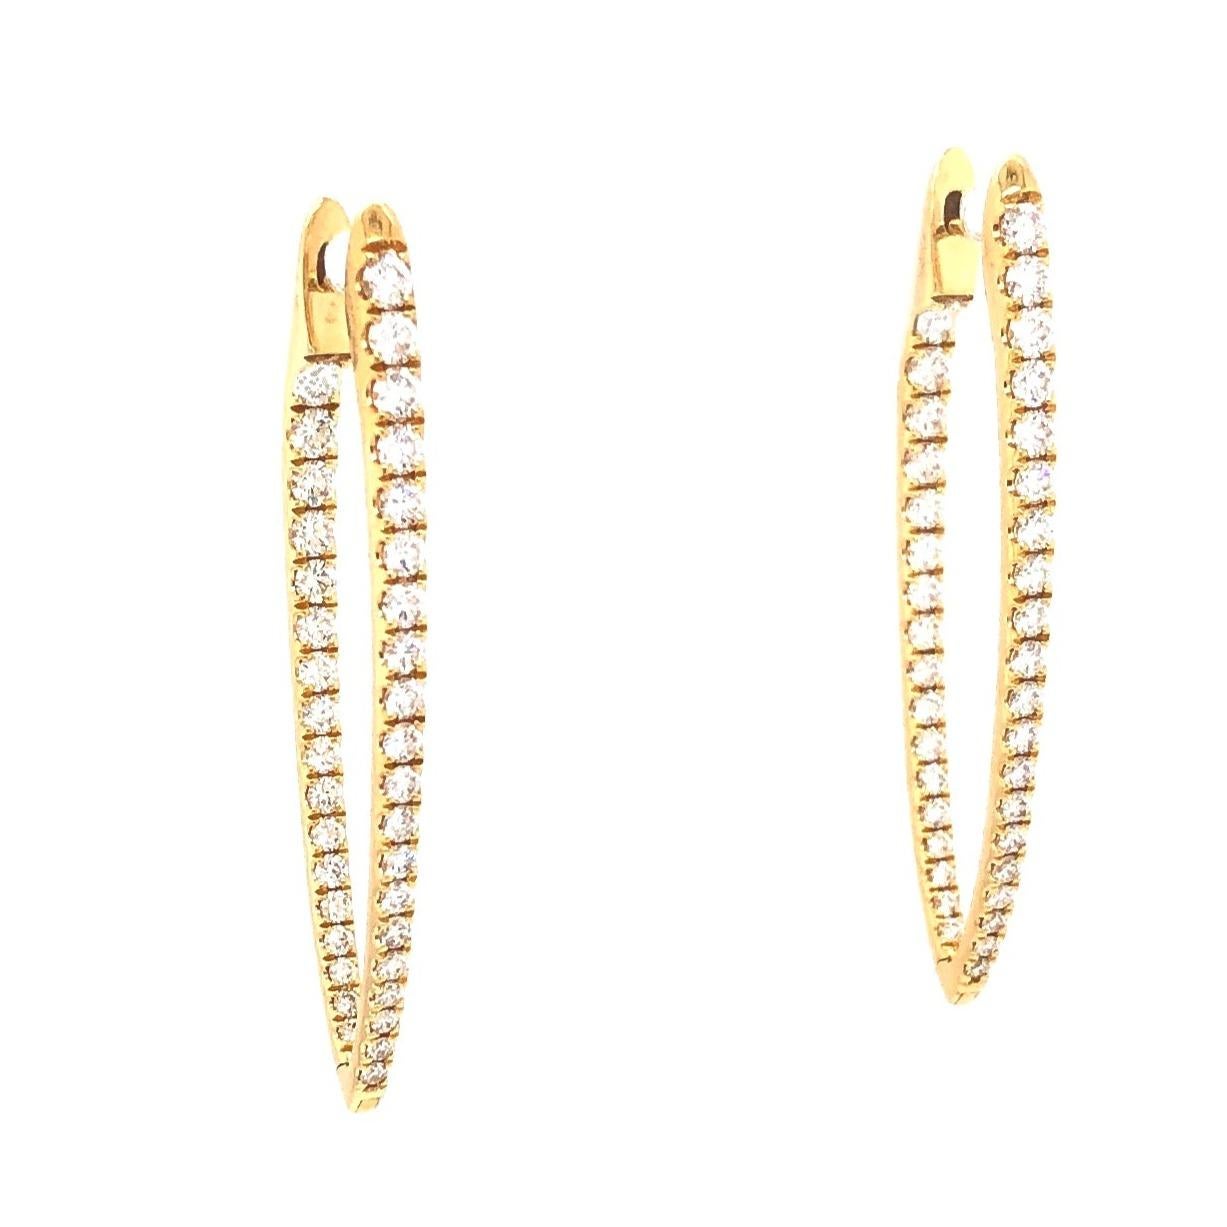 Brilliant Cut Memoire 18k Yellow Gold Imperial Hoops 74 Diamonds Equals 1.67ctw For Sale